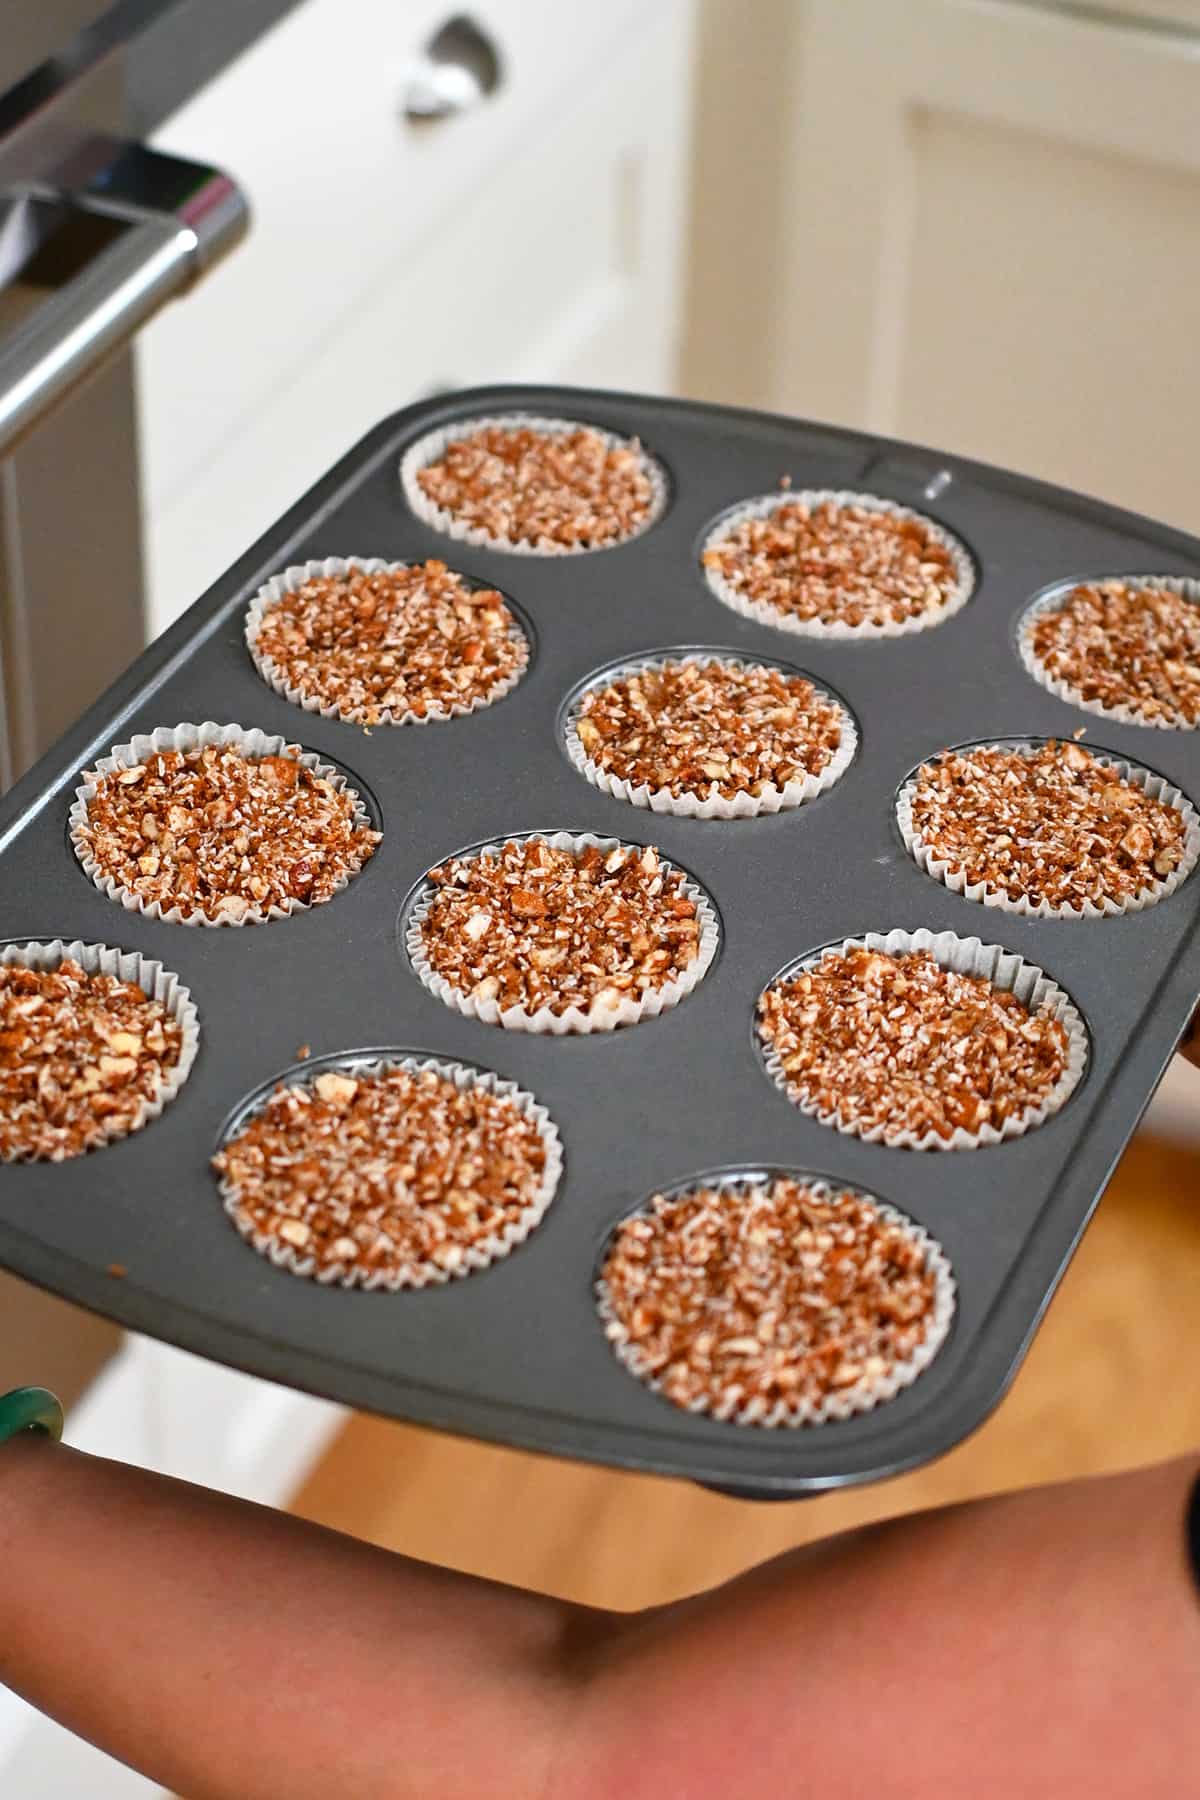 Placing a tray of paleo and gluten free apple muffins into the oven.